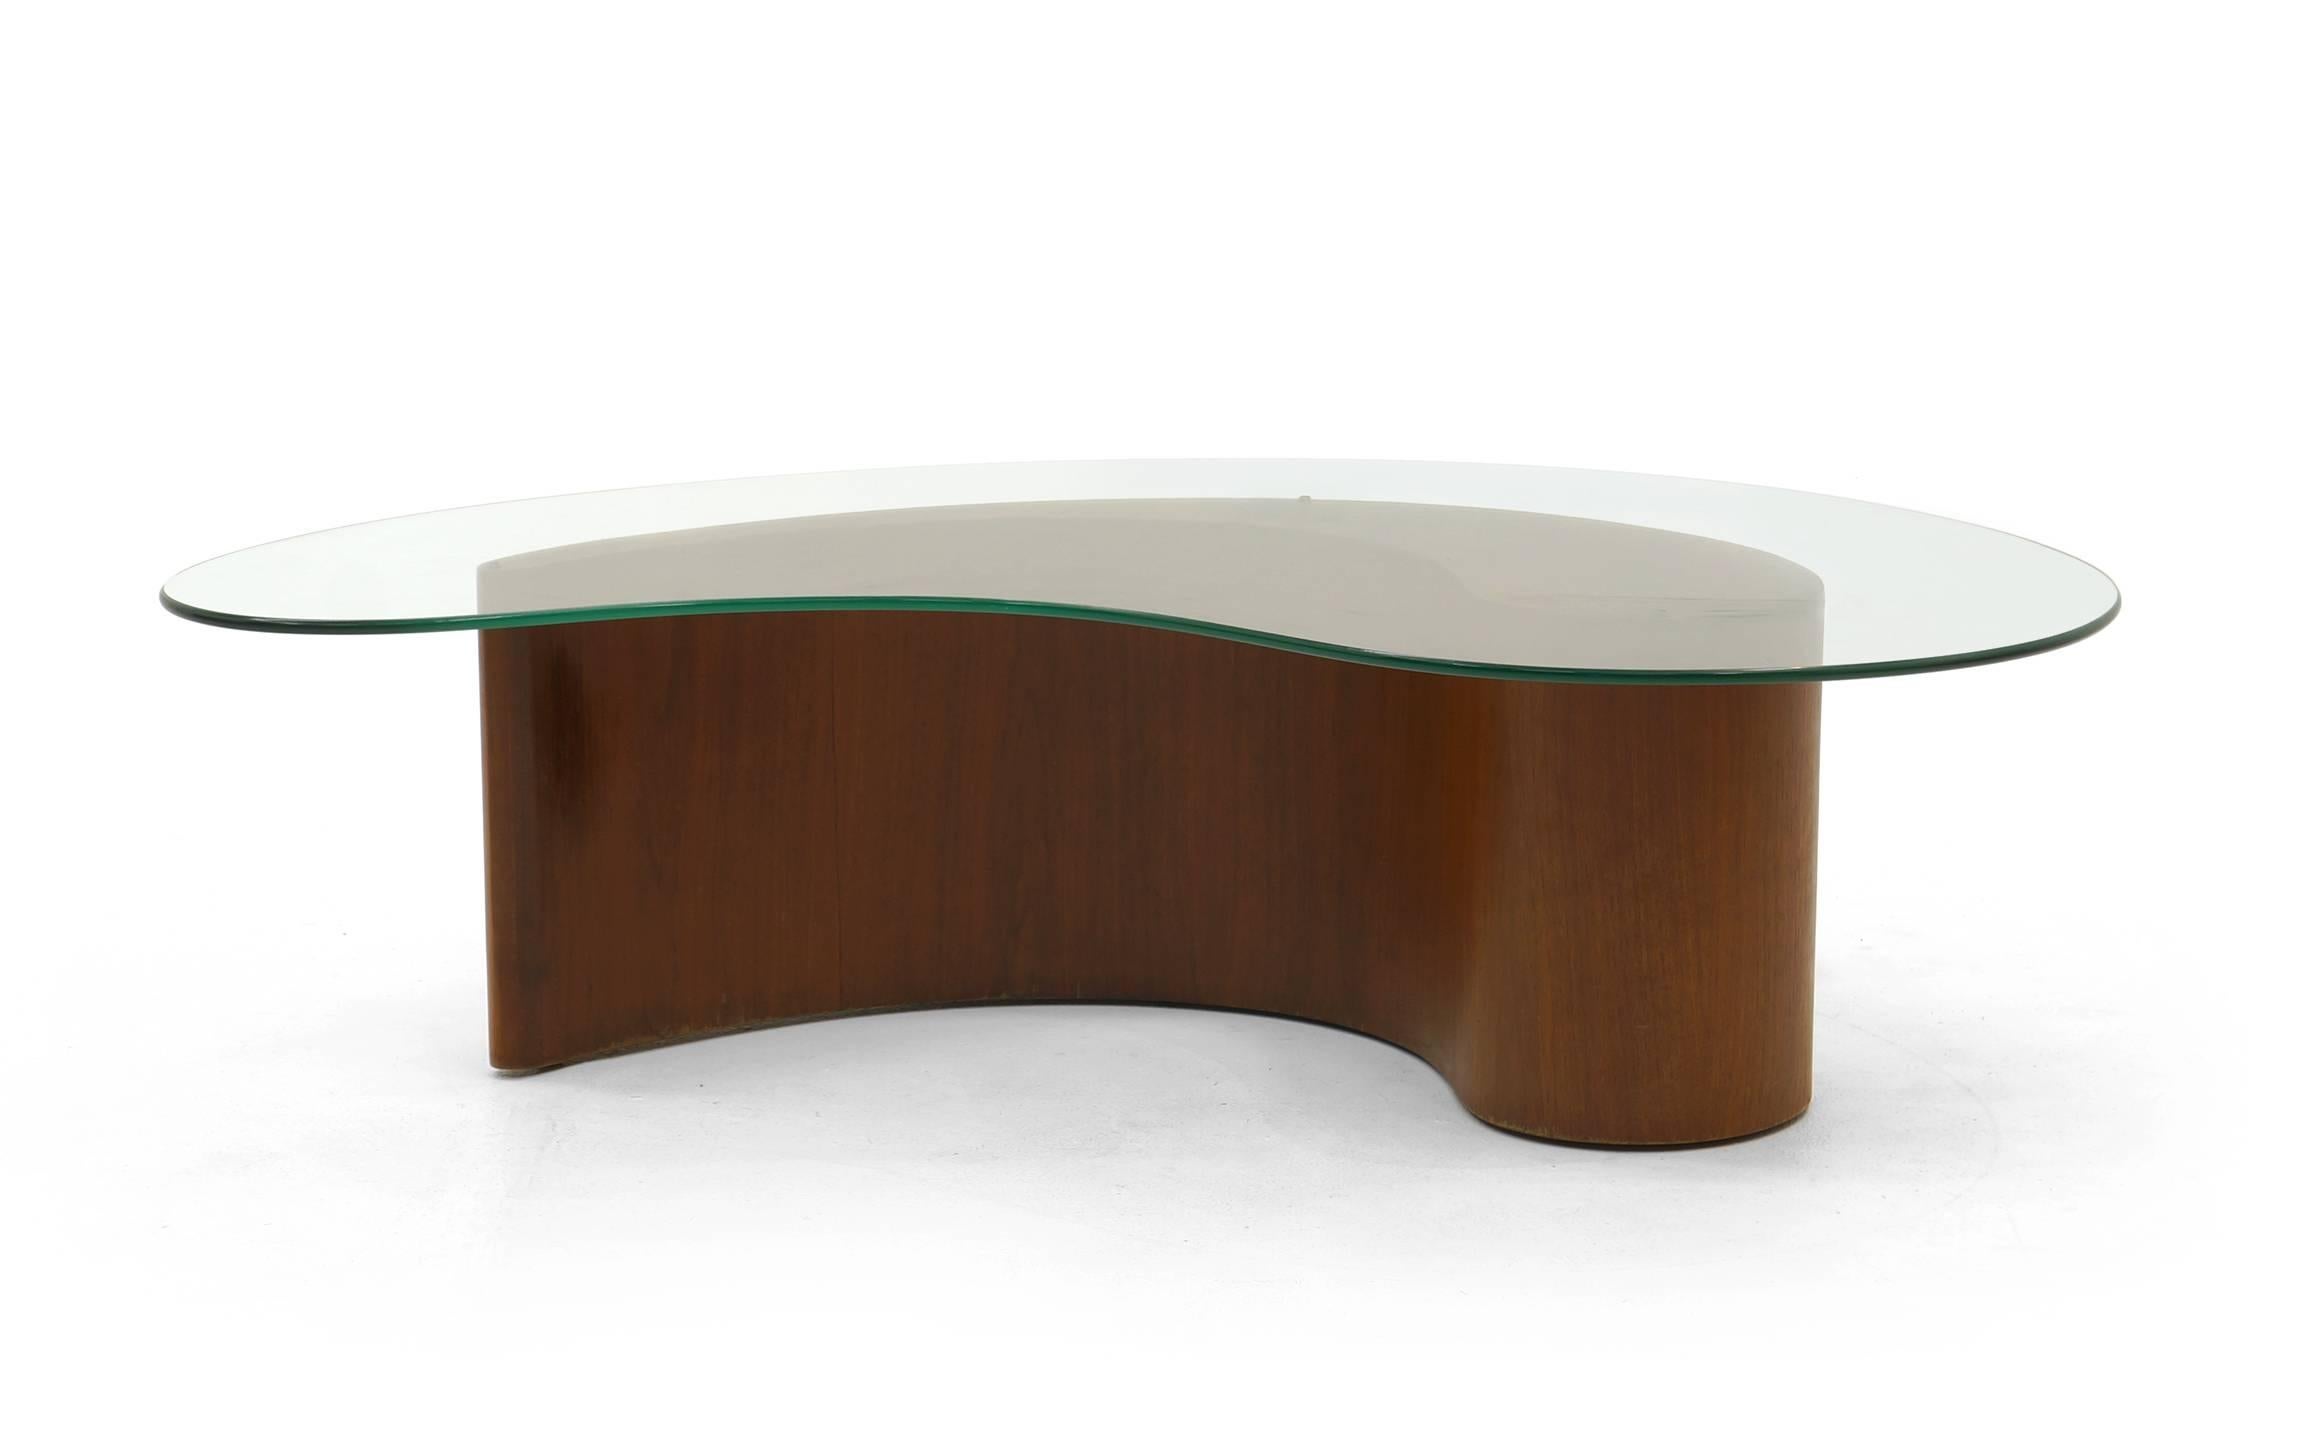 Vladimir Kagan for Selig biomorphic comma table, also referred to as the apostrophe table. Walnut base and original kidney shaped glass. We will be posting a Kagan cloud sofa in the near future that would be the perfect compliment to this table.